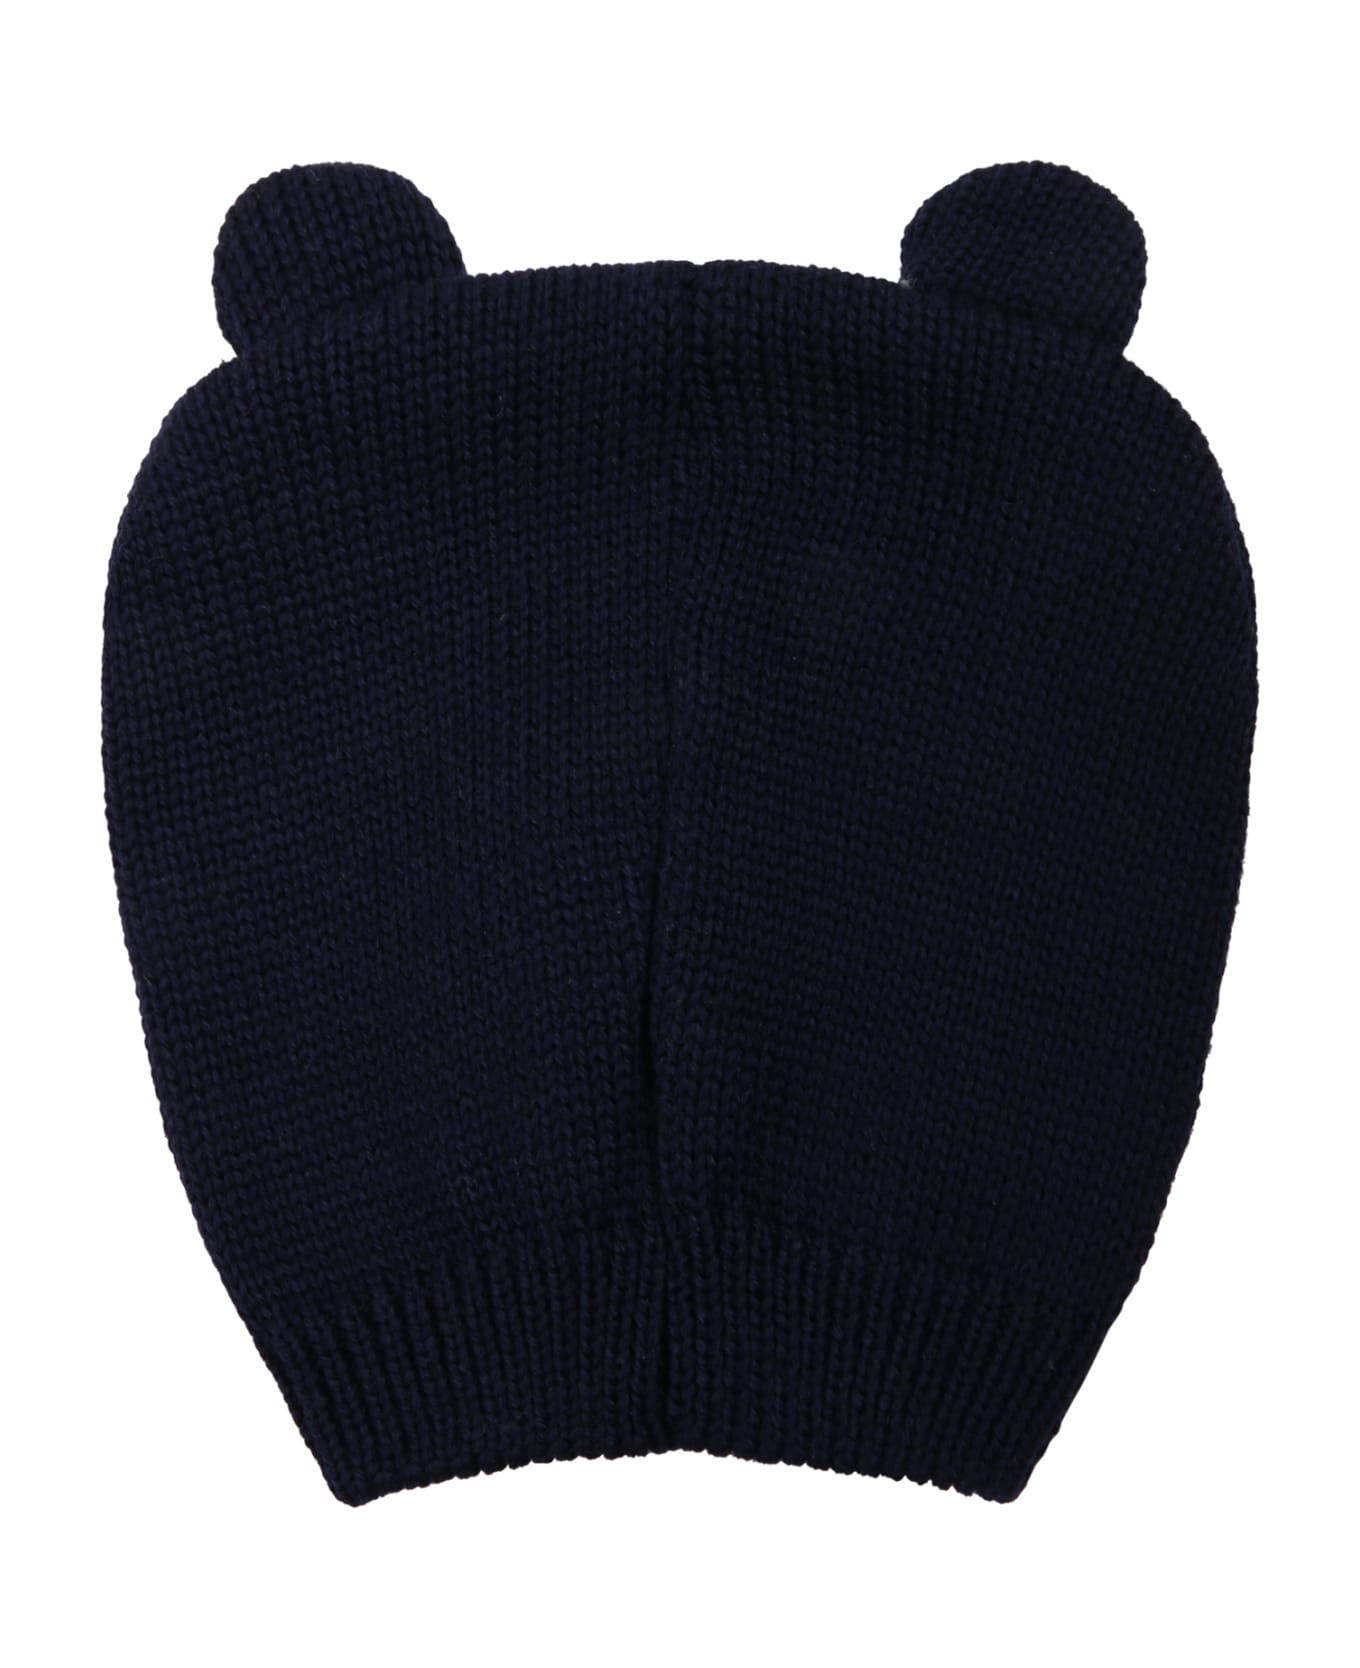 Little Bear Blue hats Hat For Baby Boy With Bear - Blue